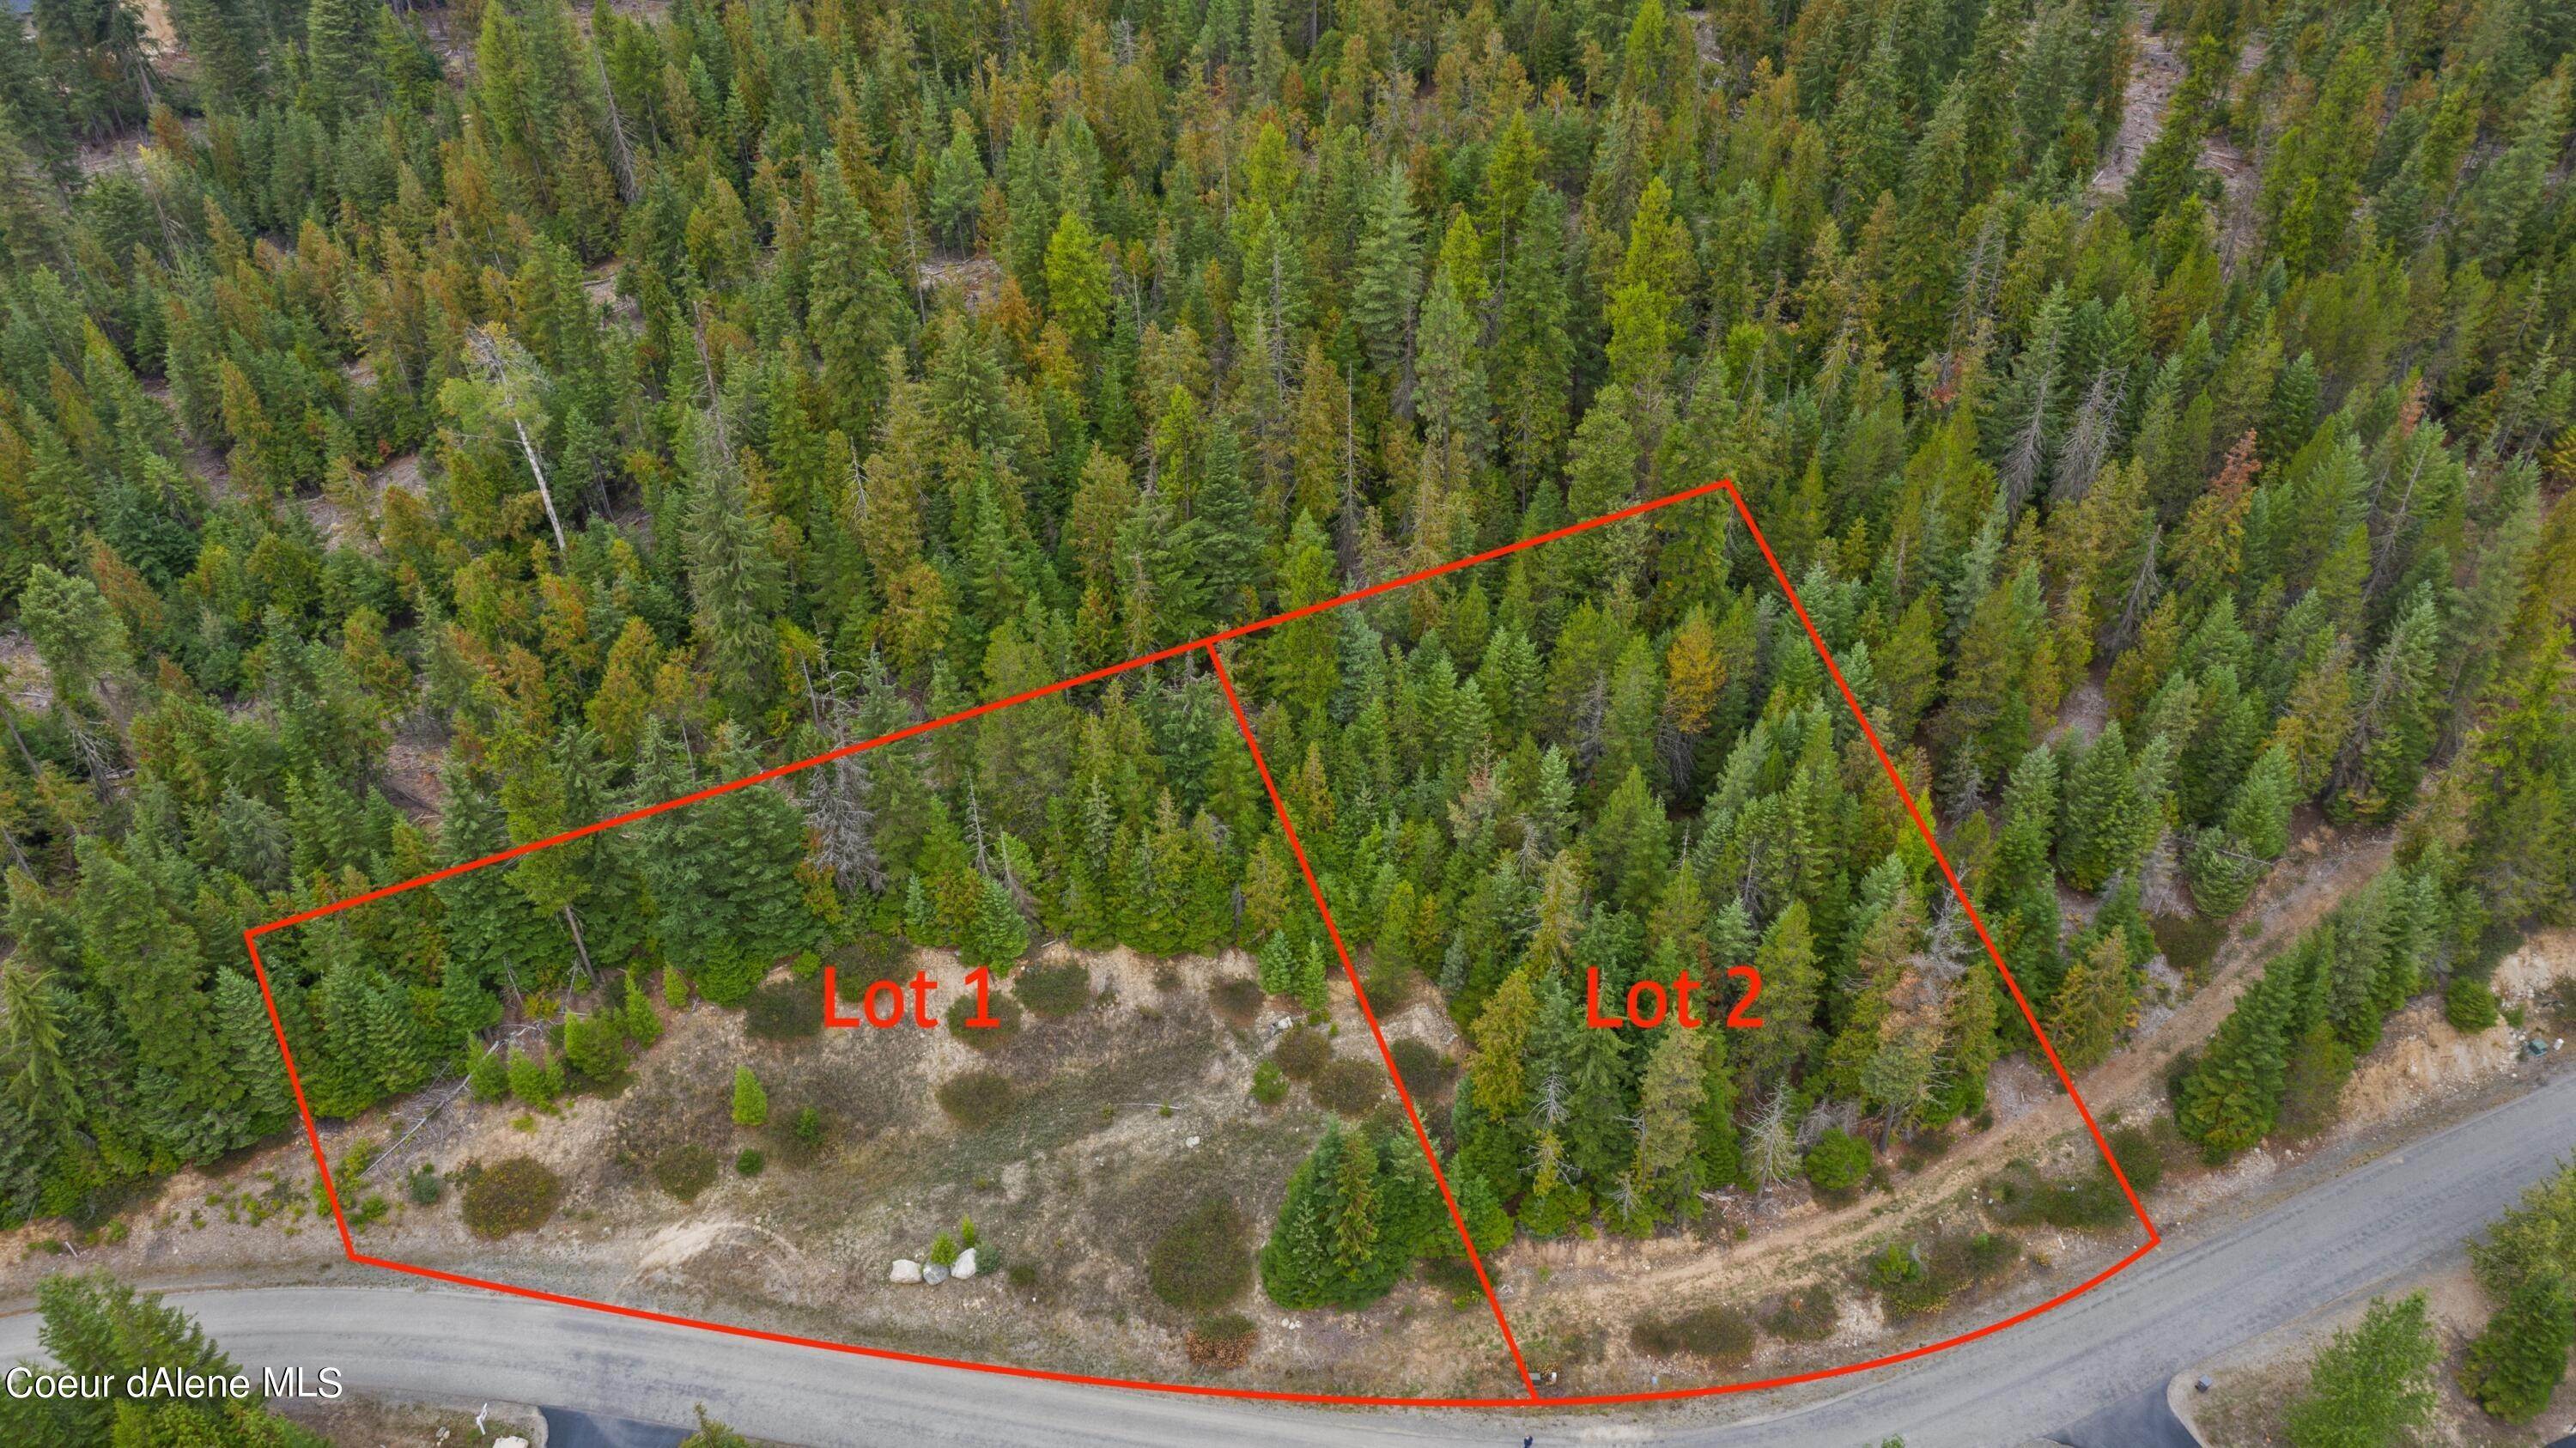 1. Land for Sale at Blk 13 Lots 1&2 Long Drive Priest Lake, Idaho 83856 United States